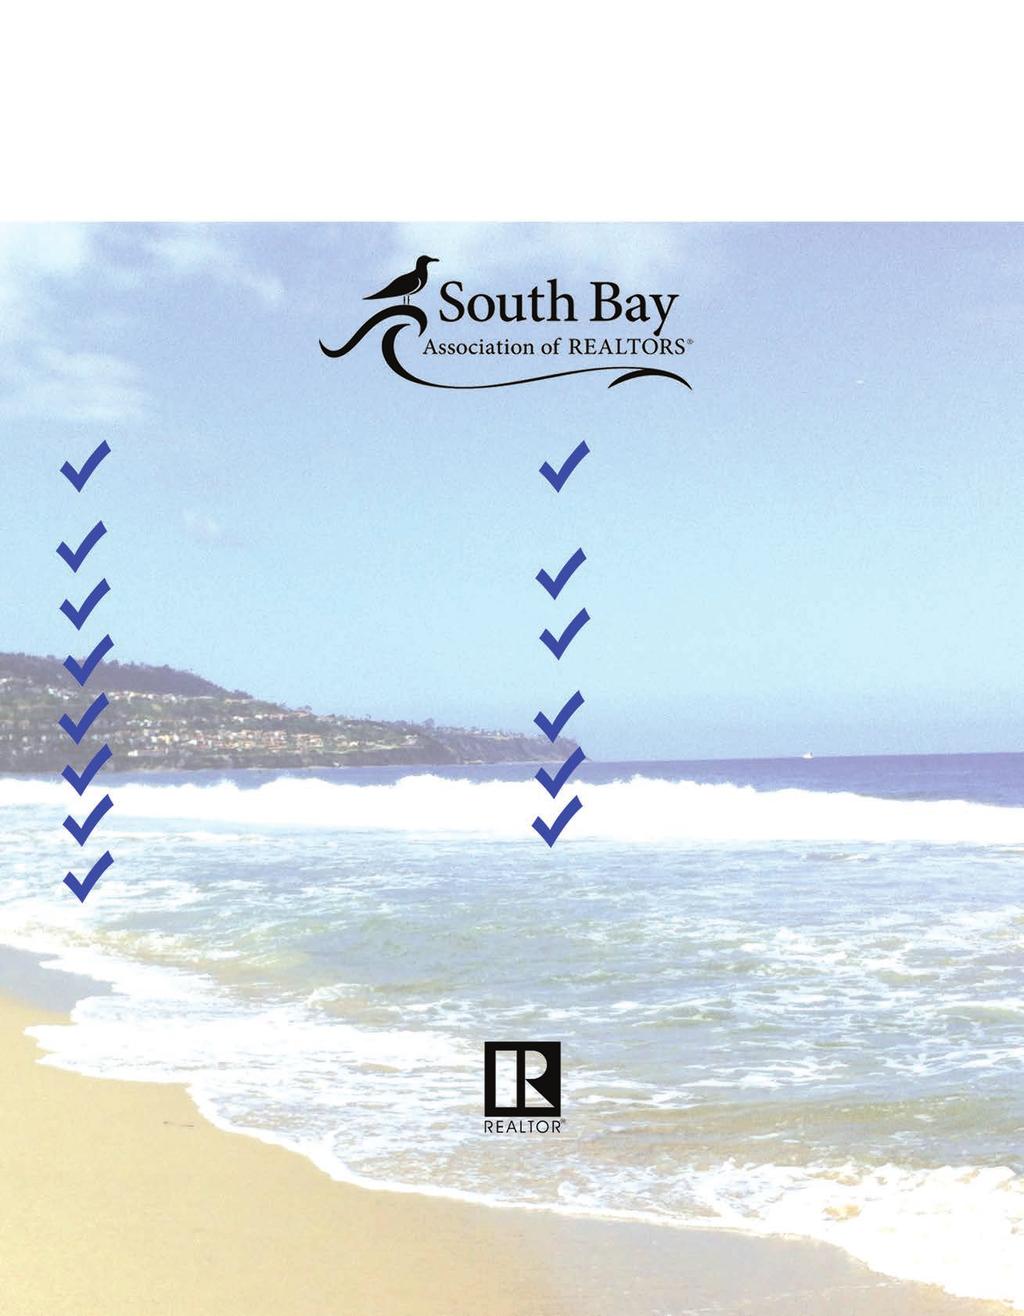 The South Bay Association of REALTORS SAYS YES to supporting and helping you grow a successful real estate business.